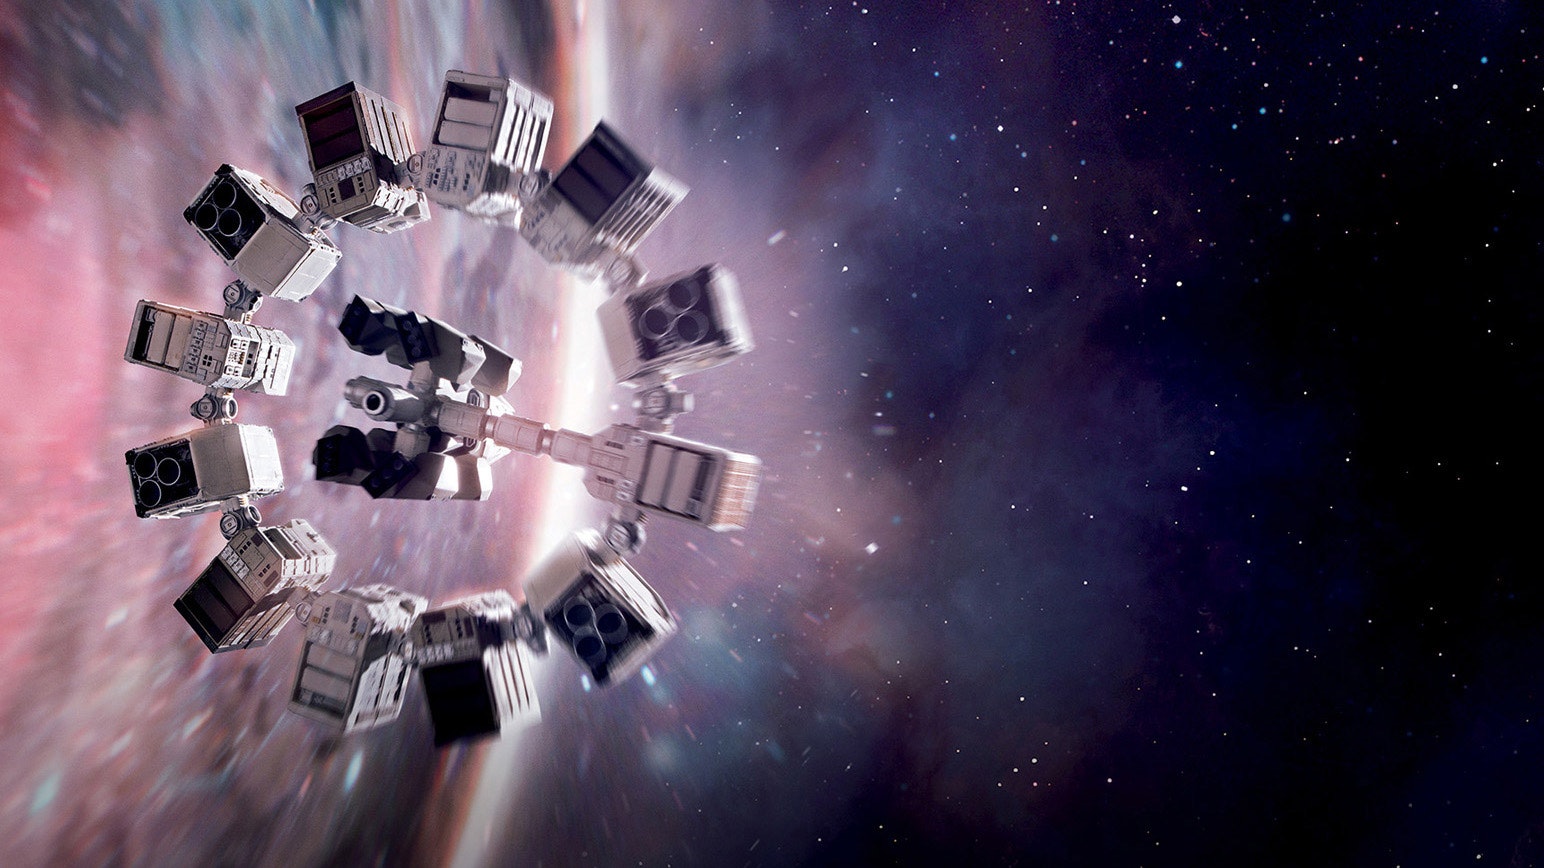 Our universe would be destroyed: Inside the science of Interstellar